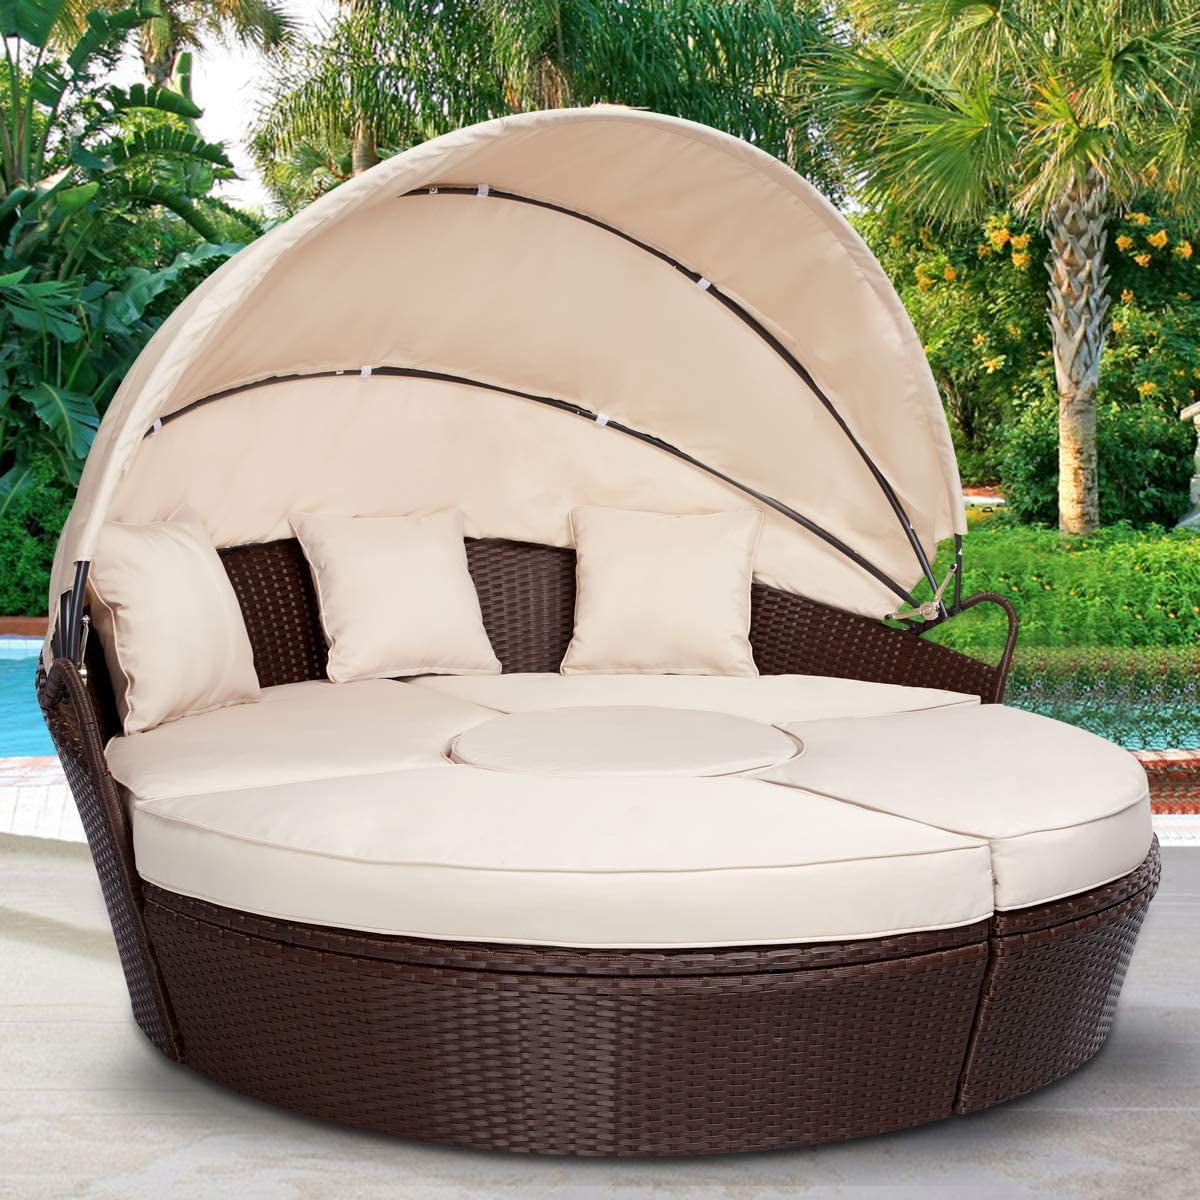 Stylish Outdoor Daybeds For Relaxation